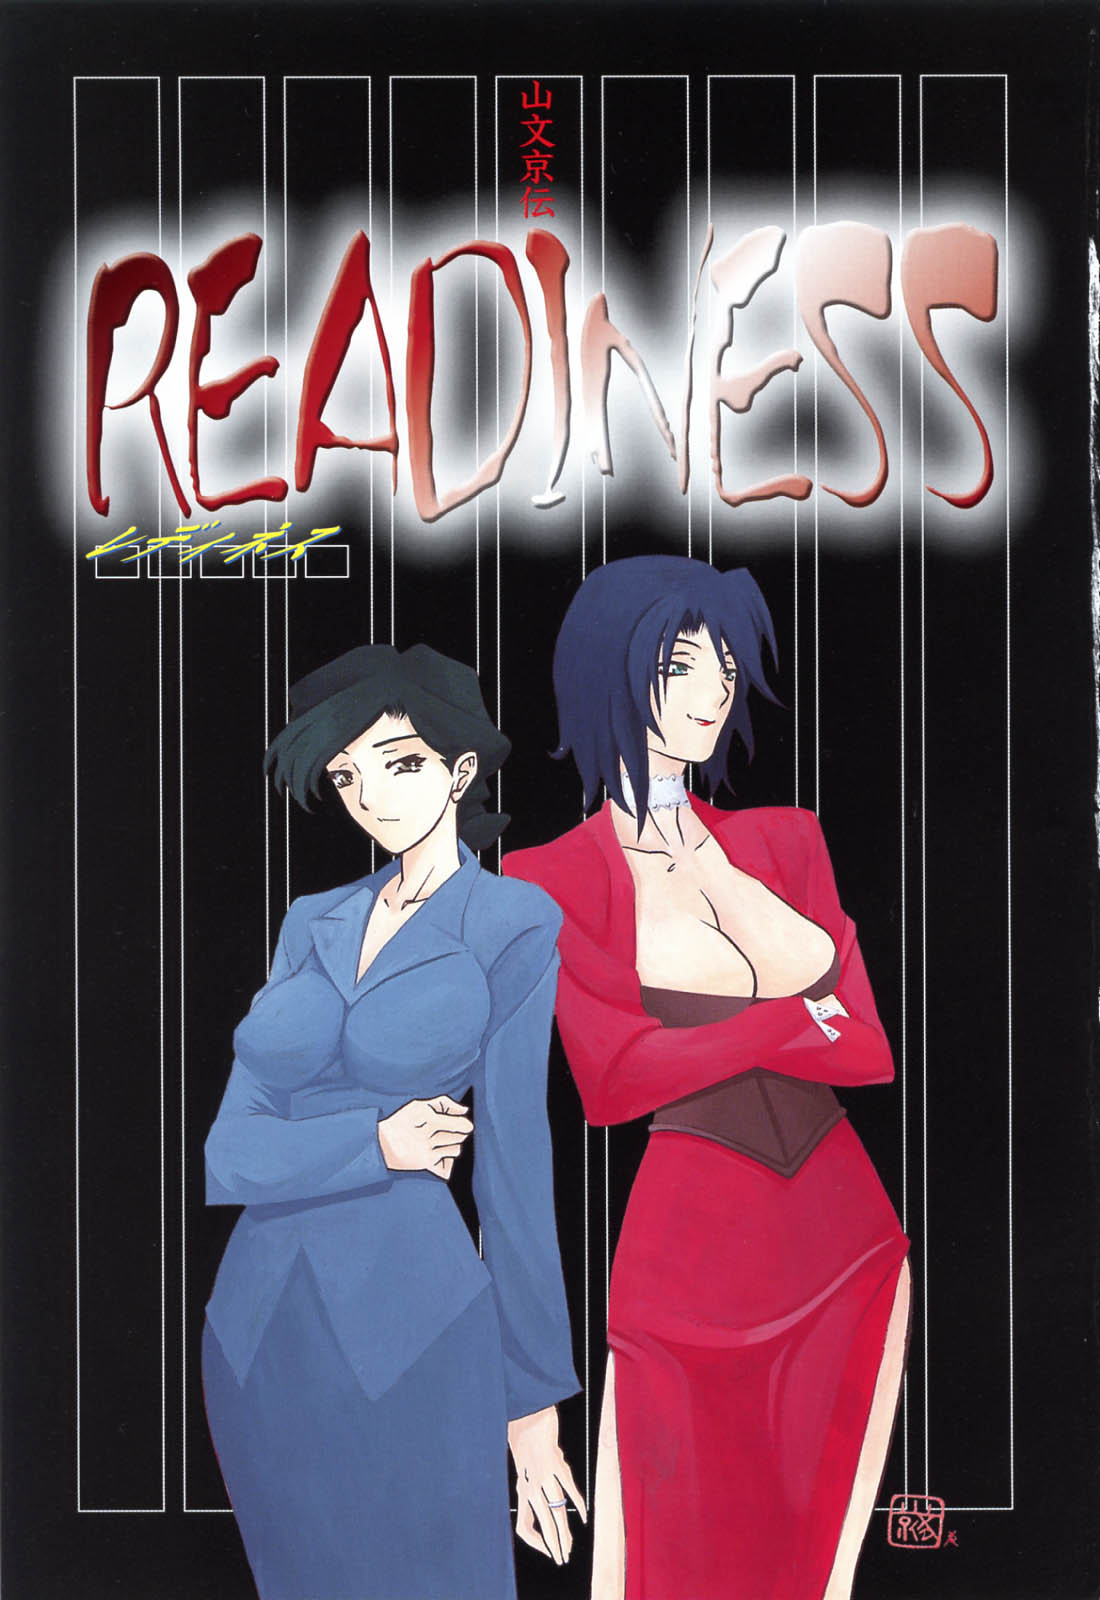 [Sanbun Kyoden] Readiness (English, Chap 1-13, Complete) [山文京伝] READINESS レディネス 章1-13 [英訳]